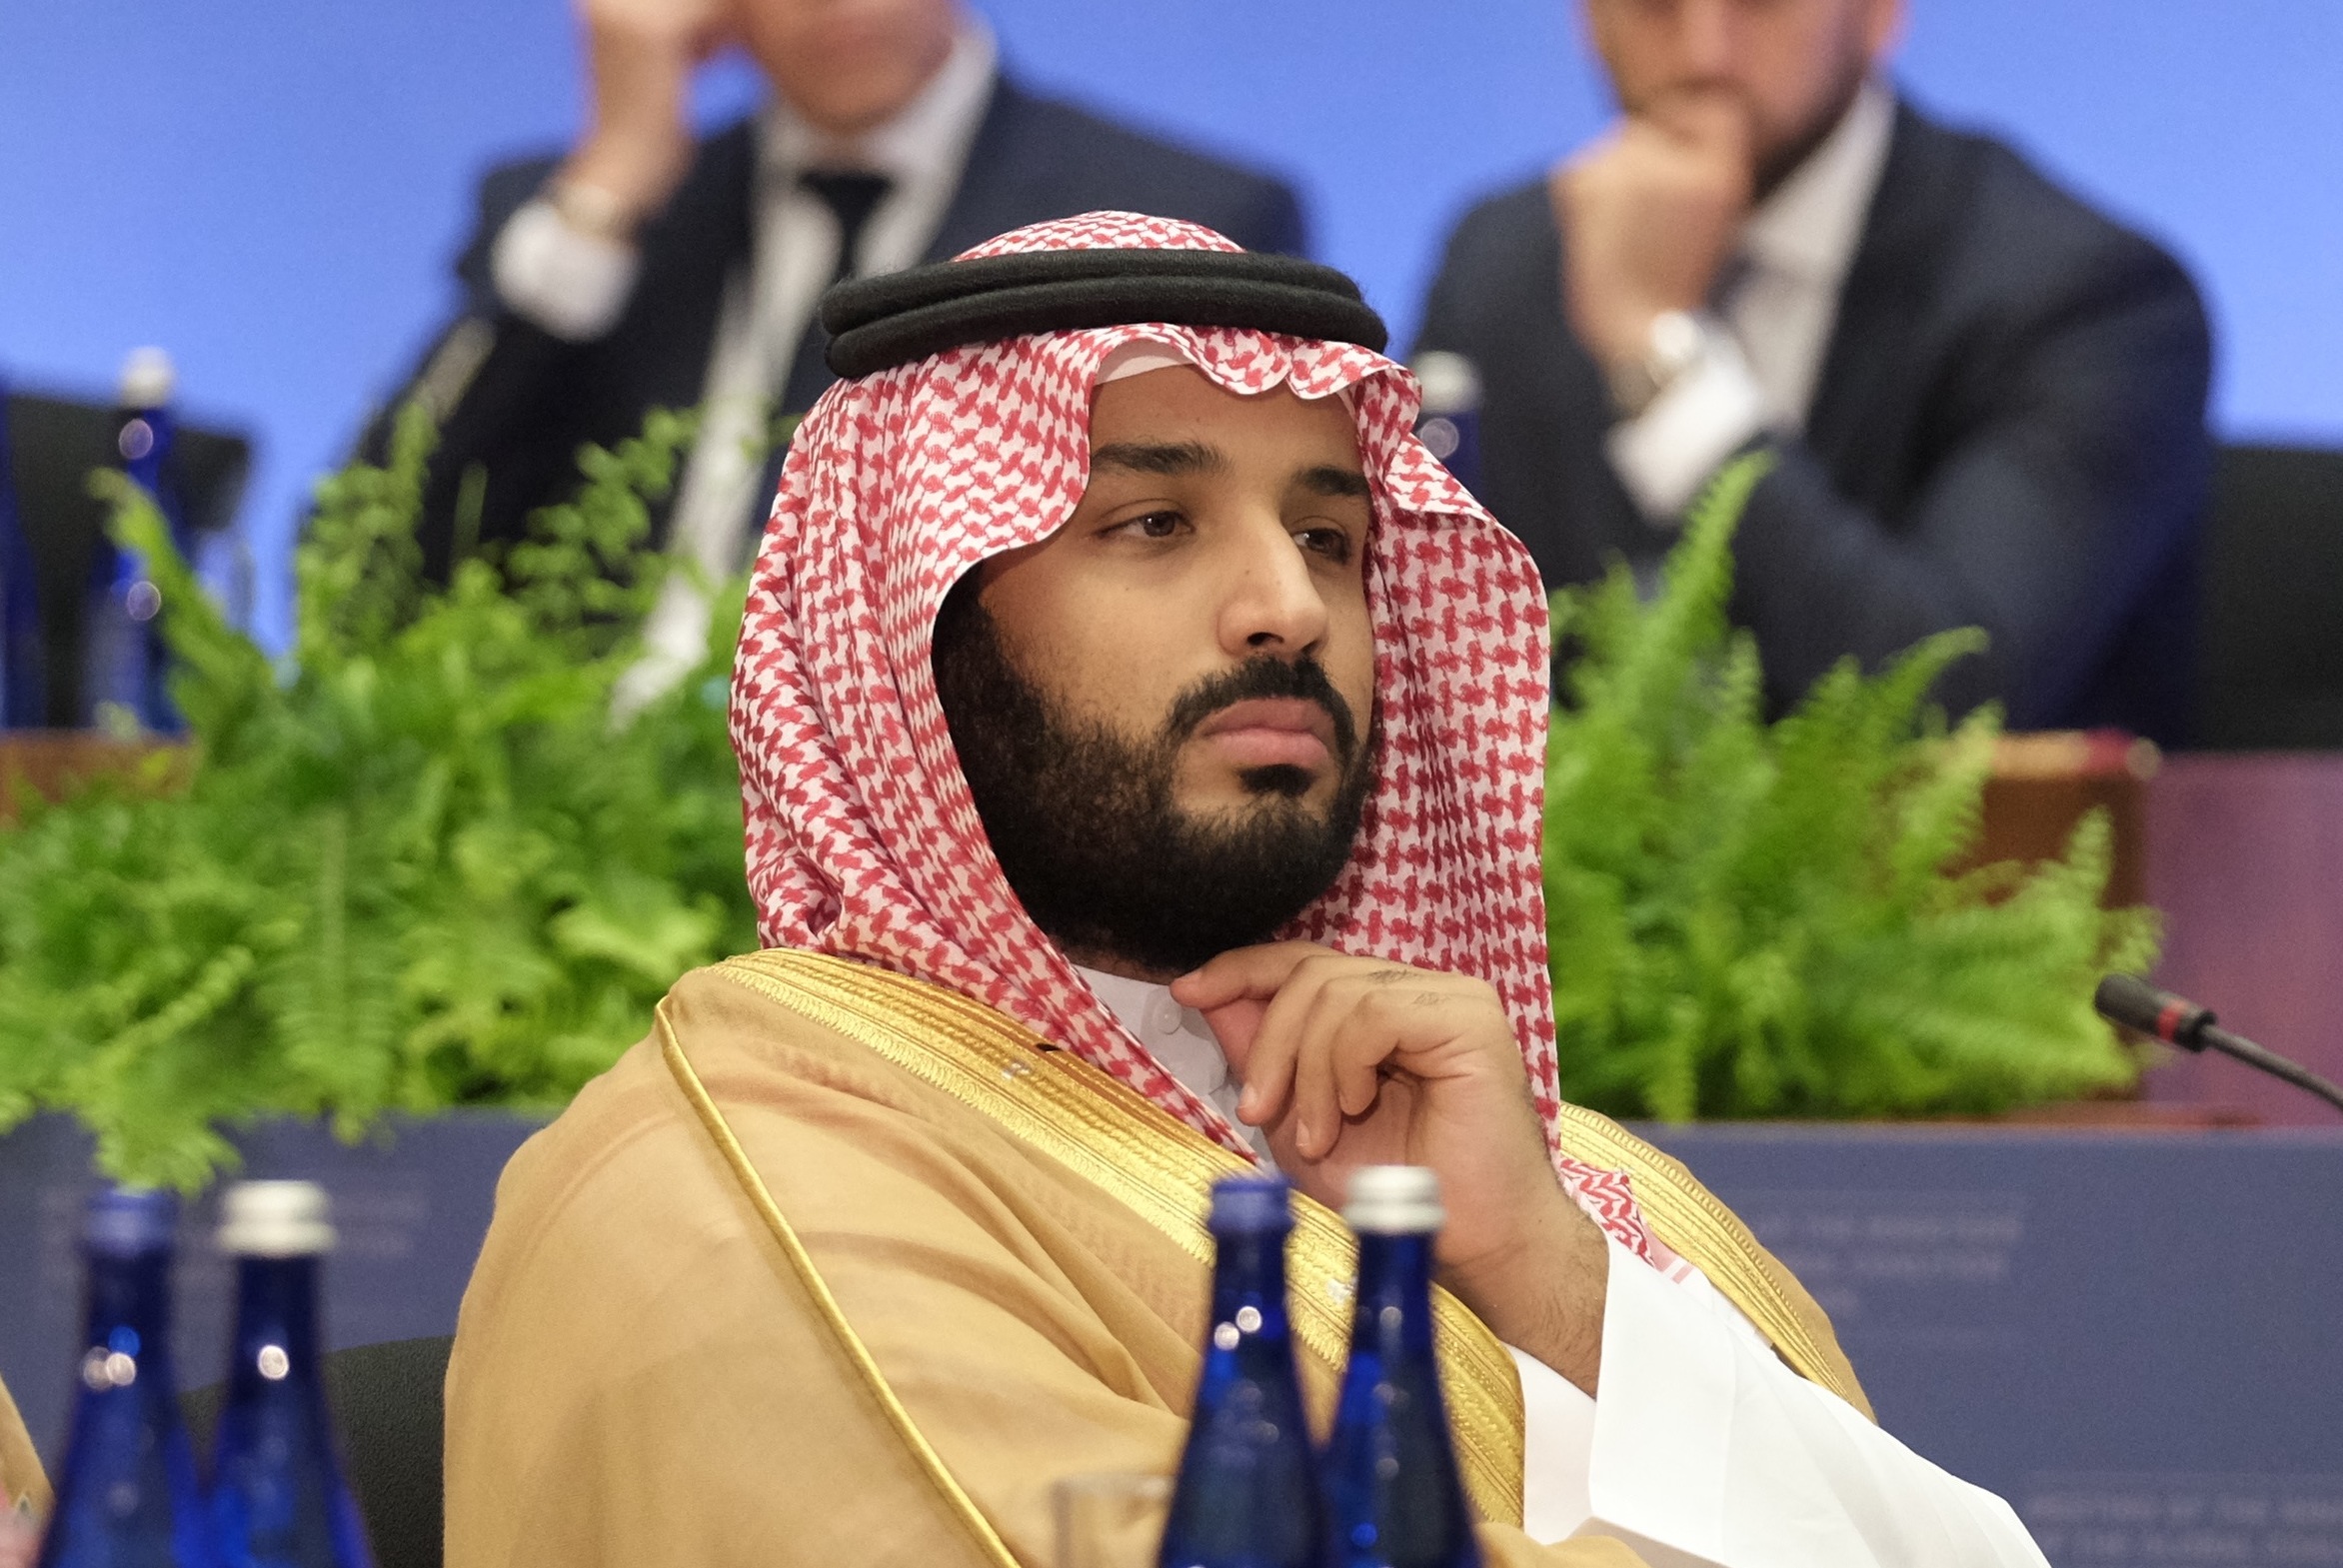 deputy crown prince mohammad bin salman bin abdulaziz al saud participates in the counter isil ministerial plenary session flickr u.s. department of state cropped